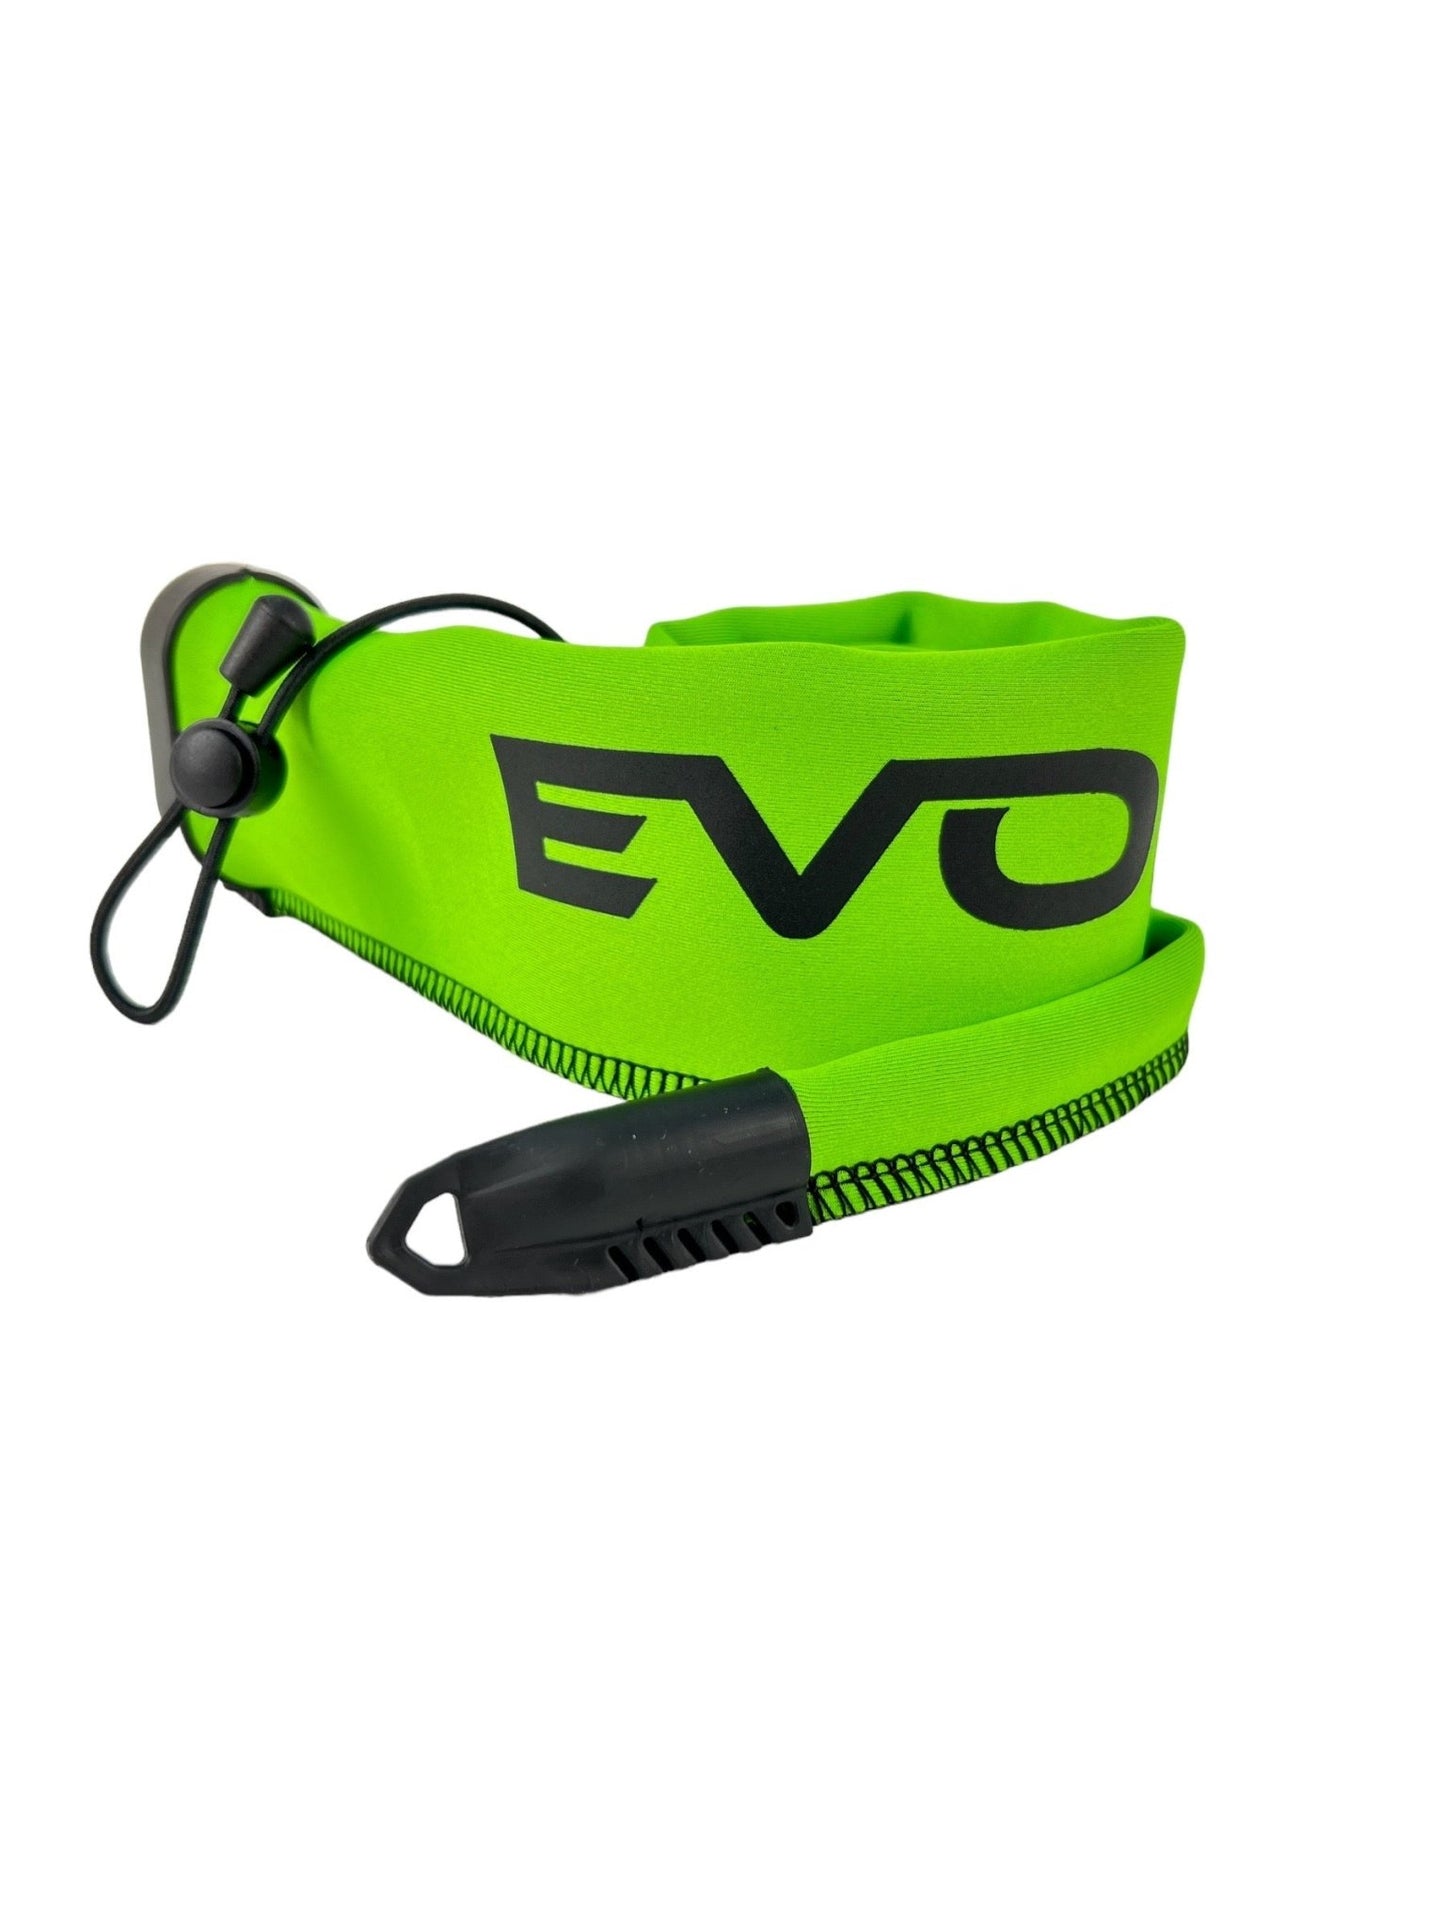 EVOLV - Limited Edition - Spinning Rod Sleeves - Angler's Pro Tackle & Outdoors